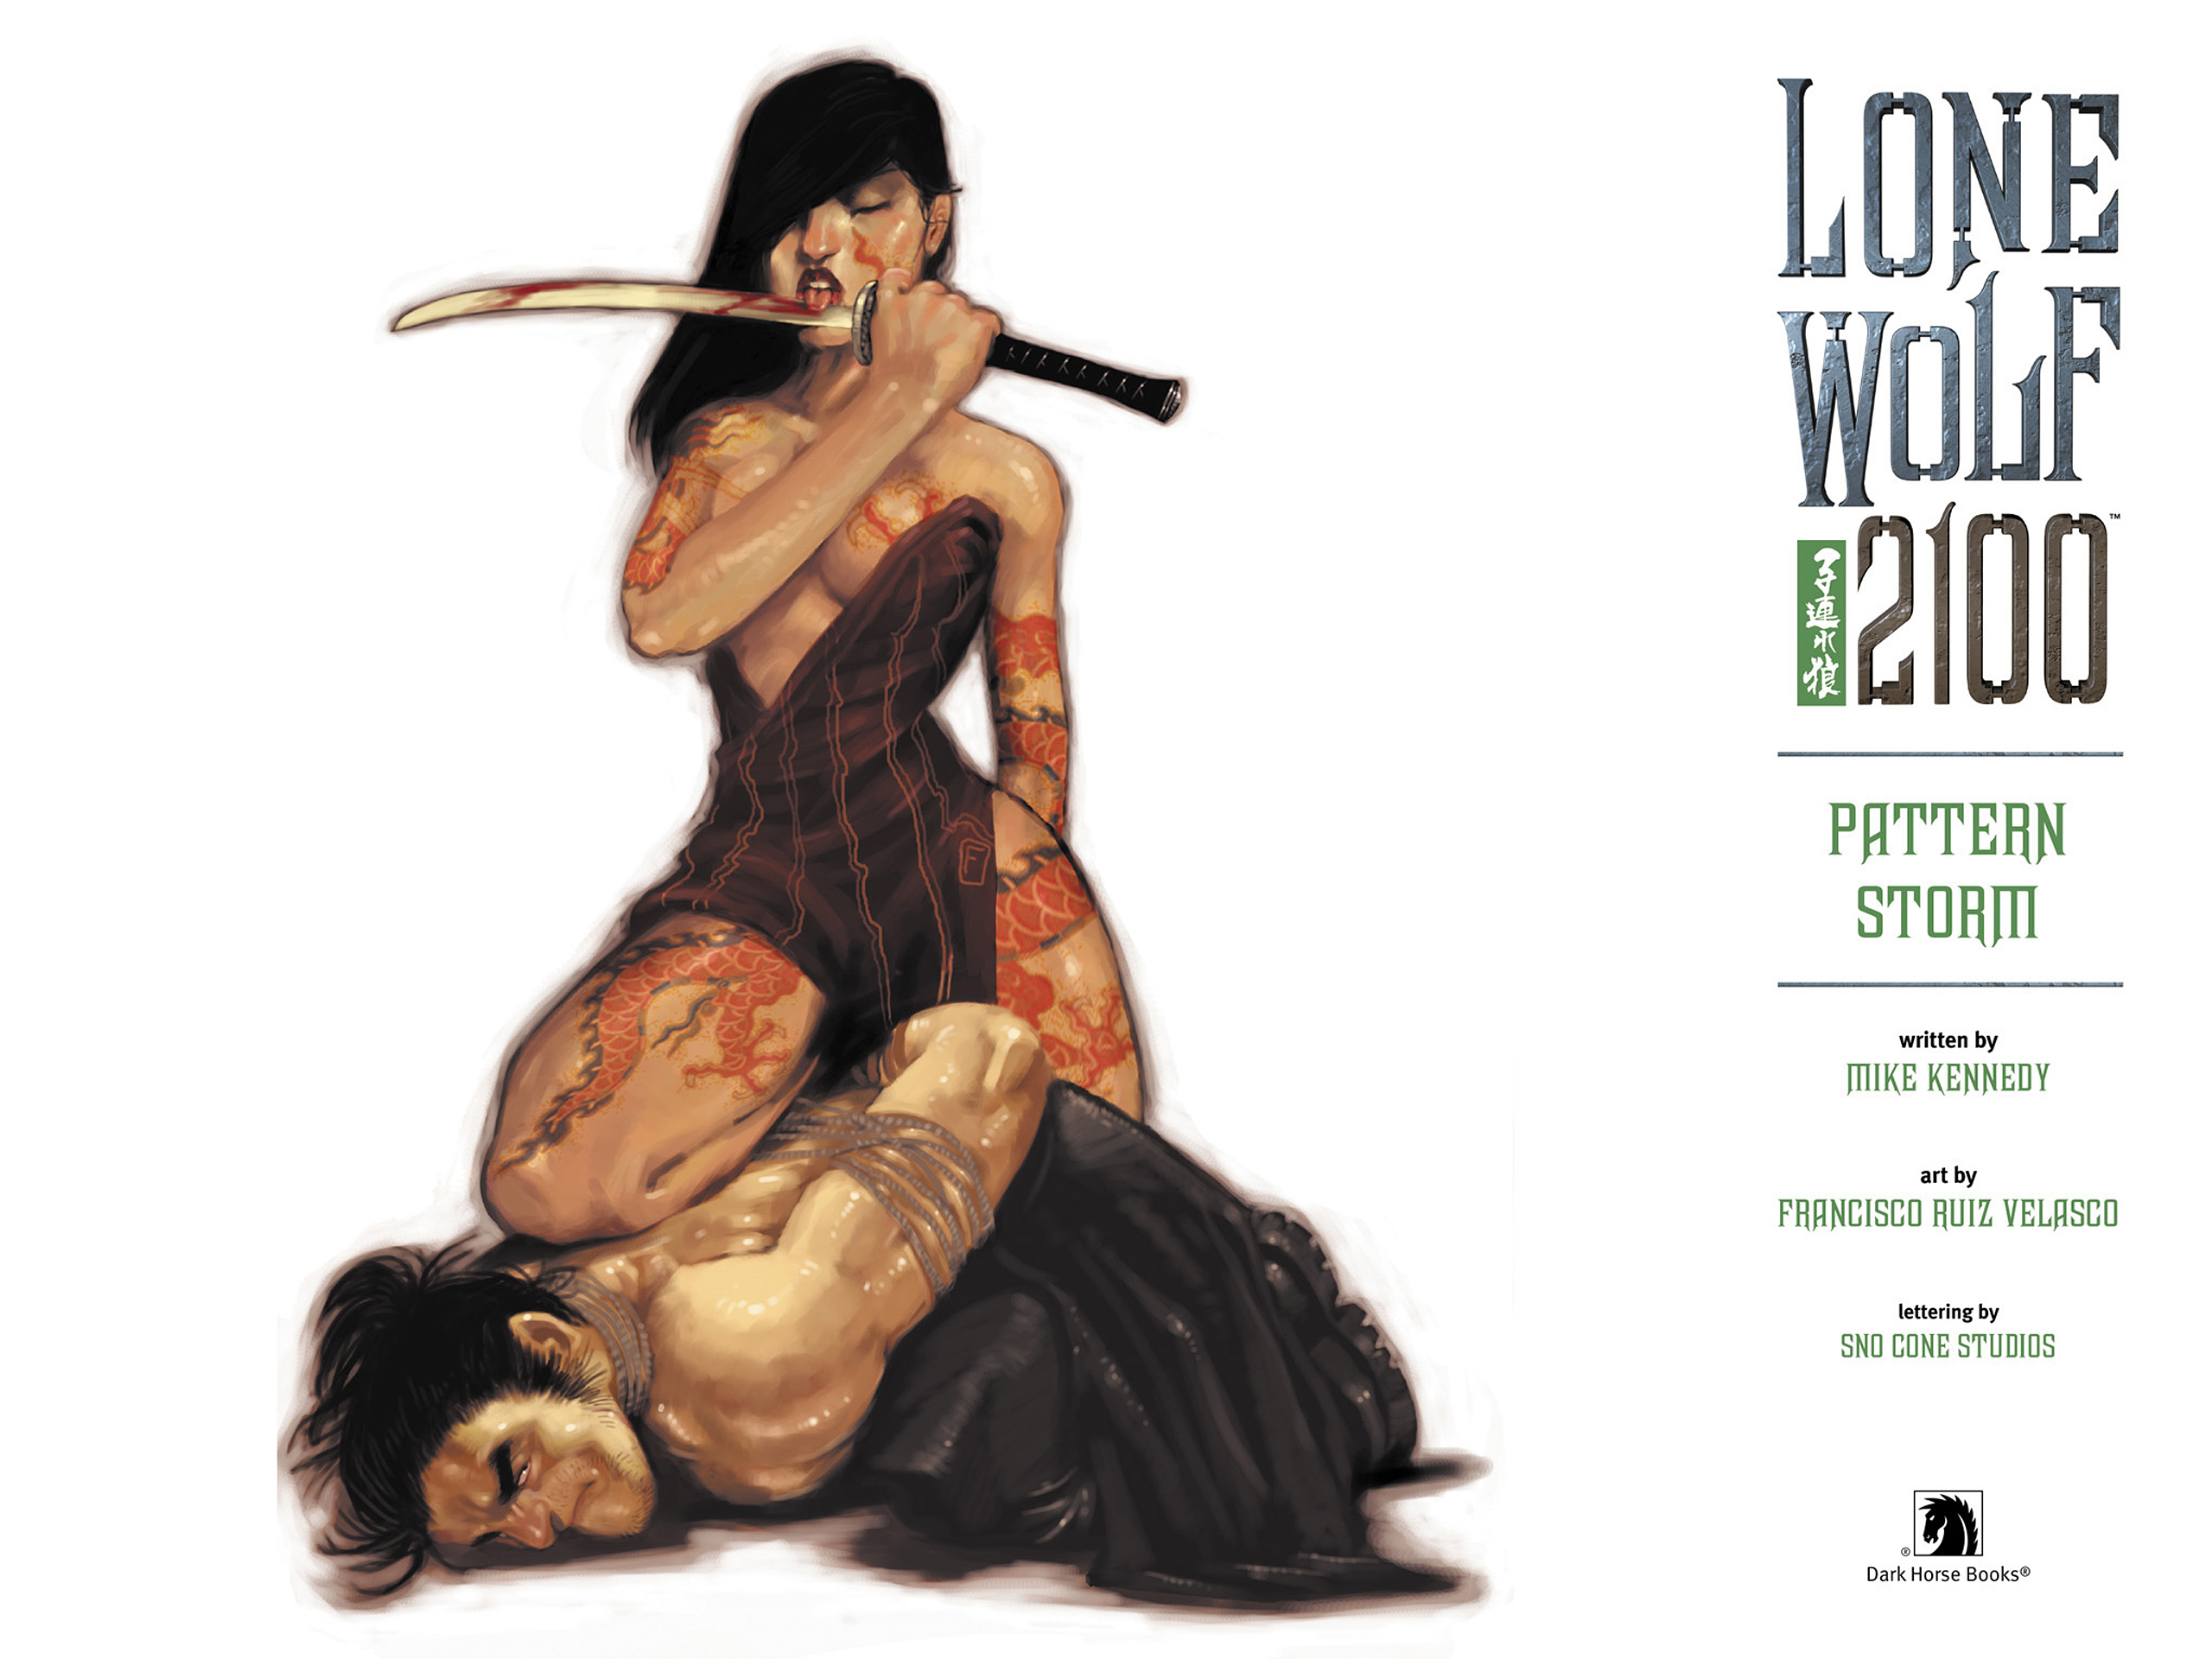 Read online Lone Wolf 2100 comic -  Issue # TPB 3 - 3